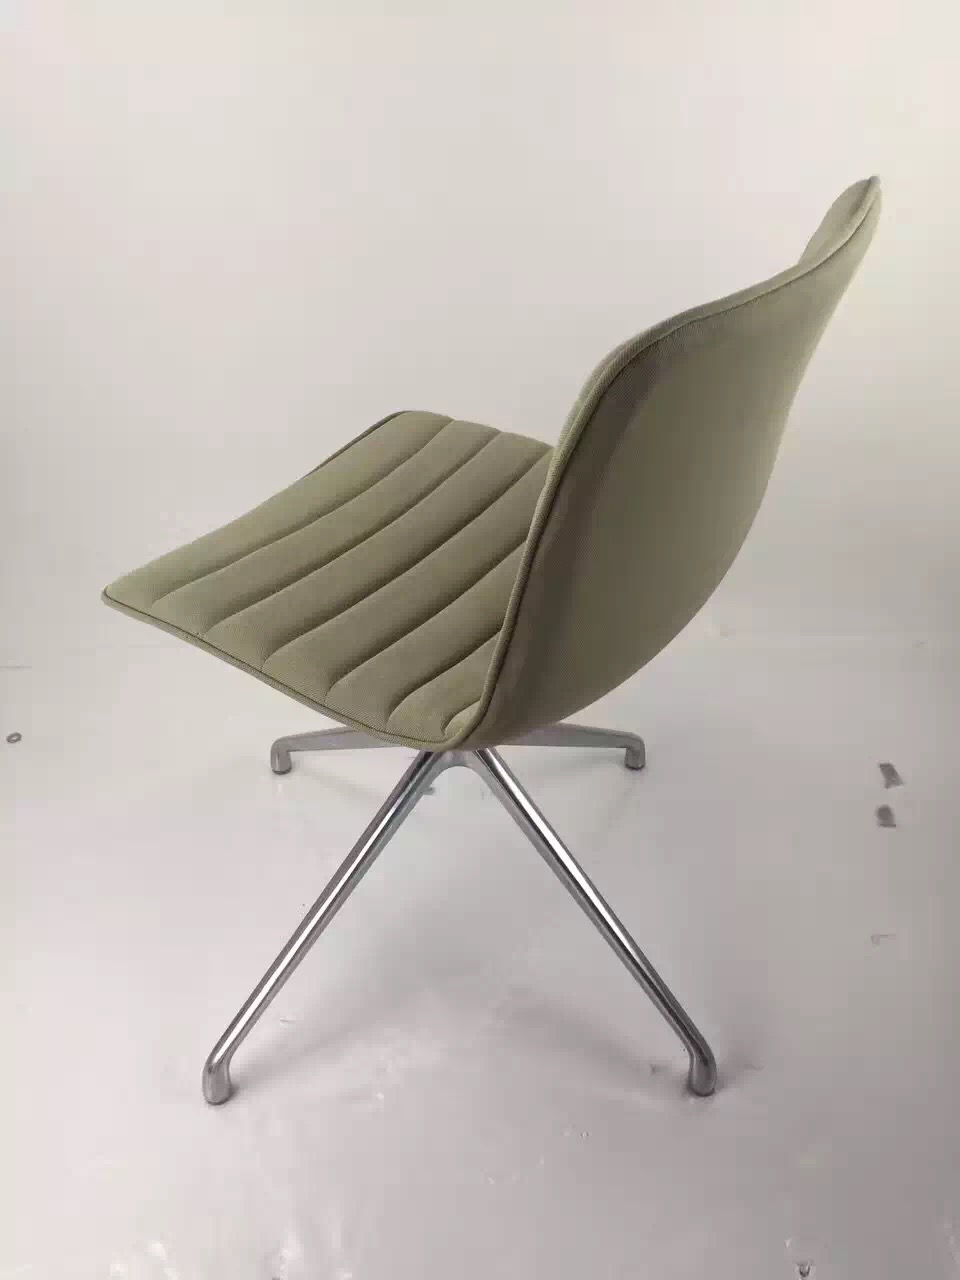 Hot Sale Elegant Beige Leather Office Chair,meeting chair,reception office chair without castor